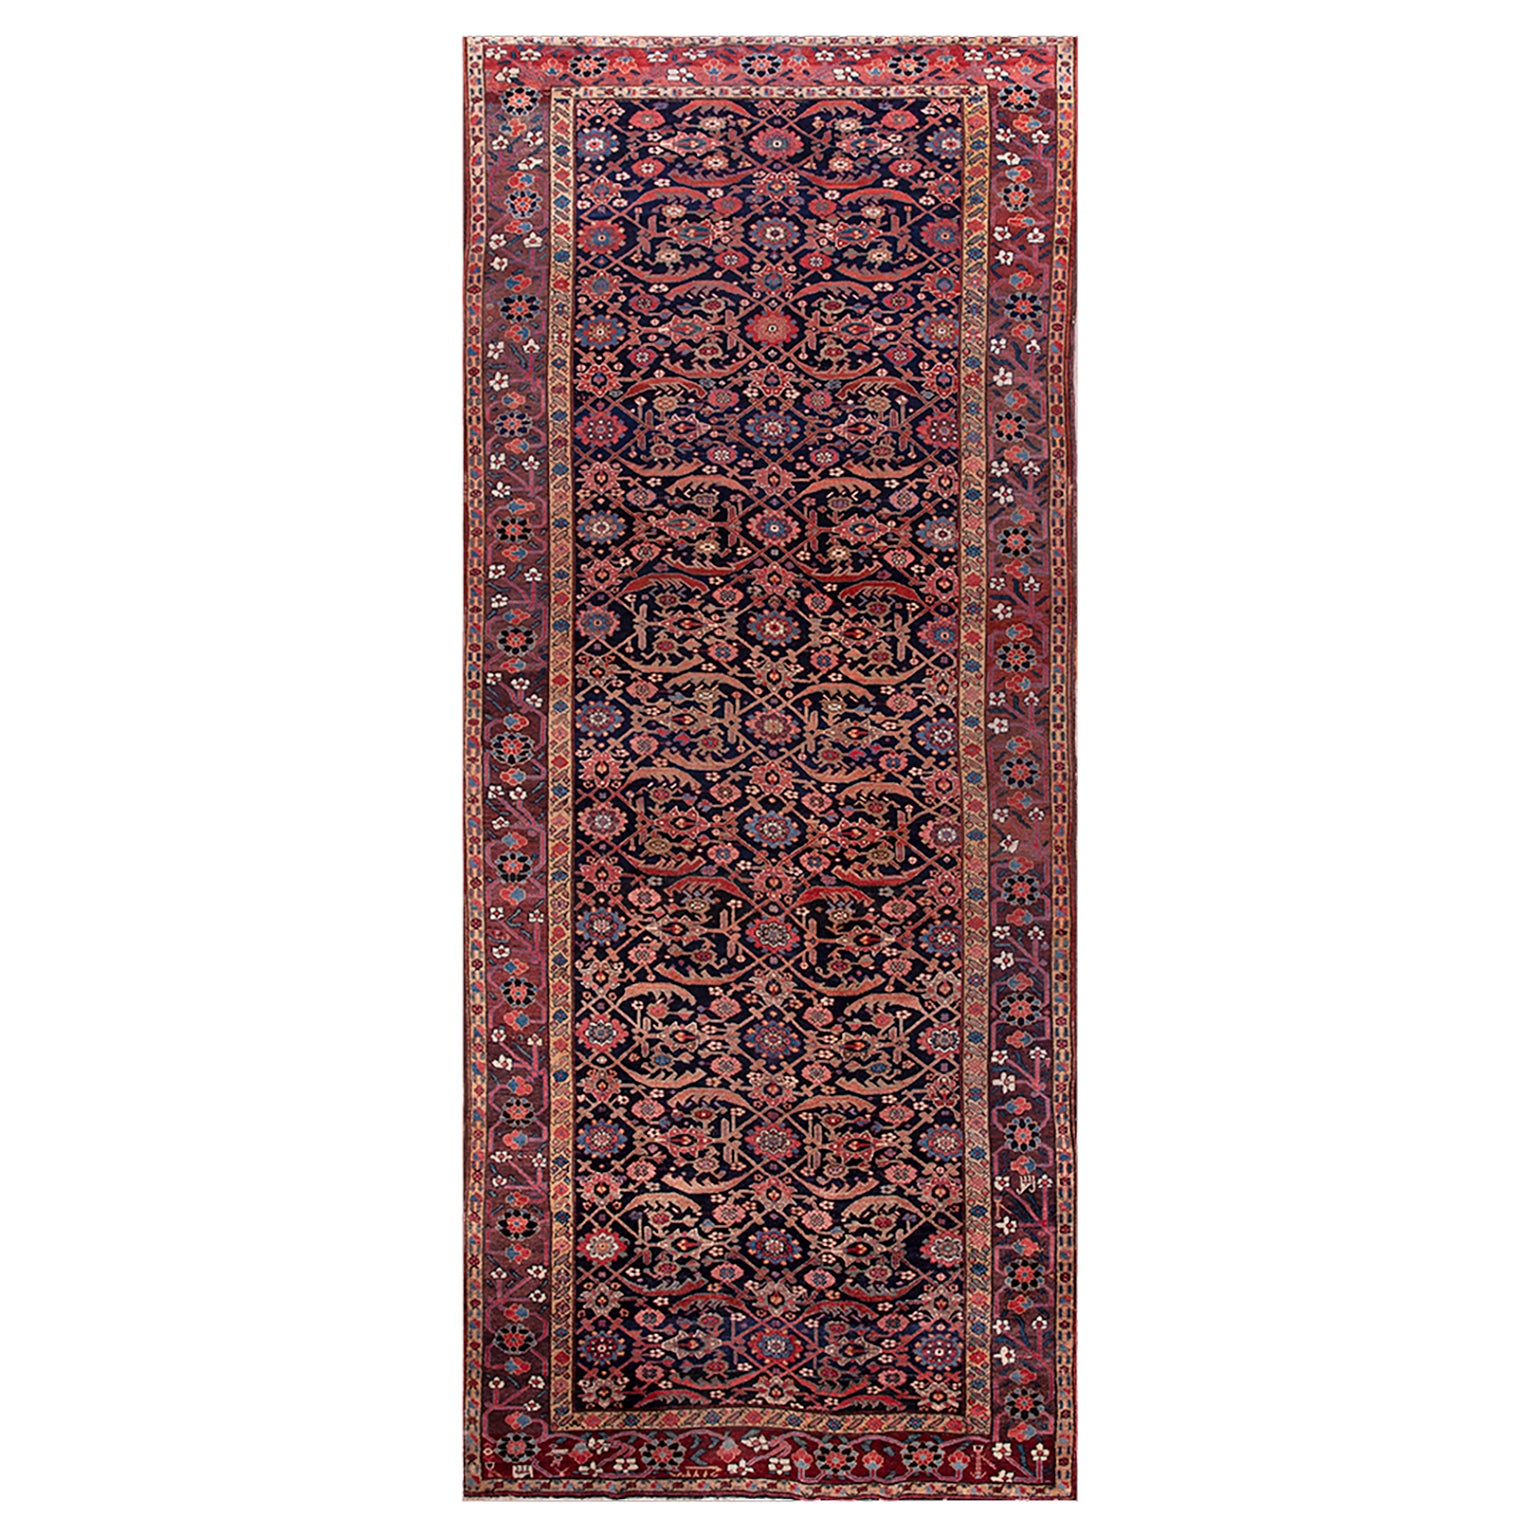 Early 19th Century N.W. Persian Gallery Carpet Dated 1822 (7'4" x 15'10" - 224) For Sale